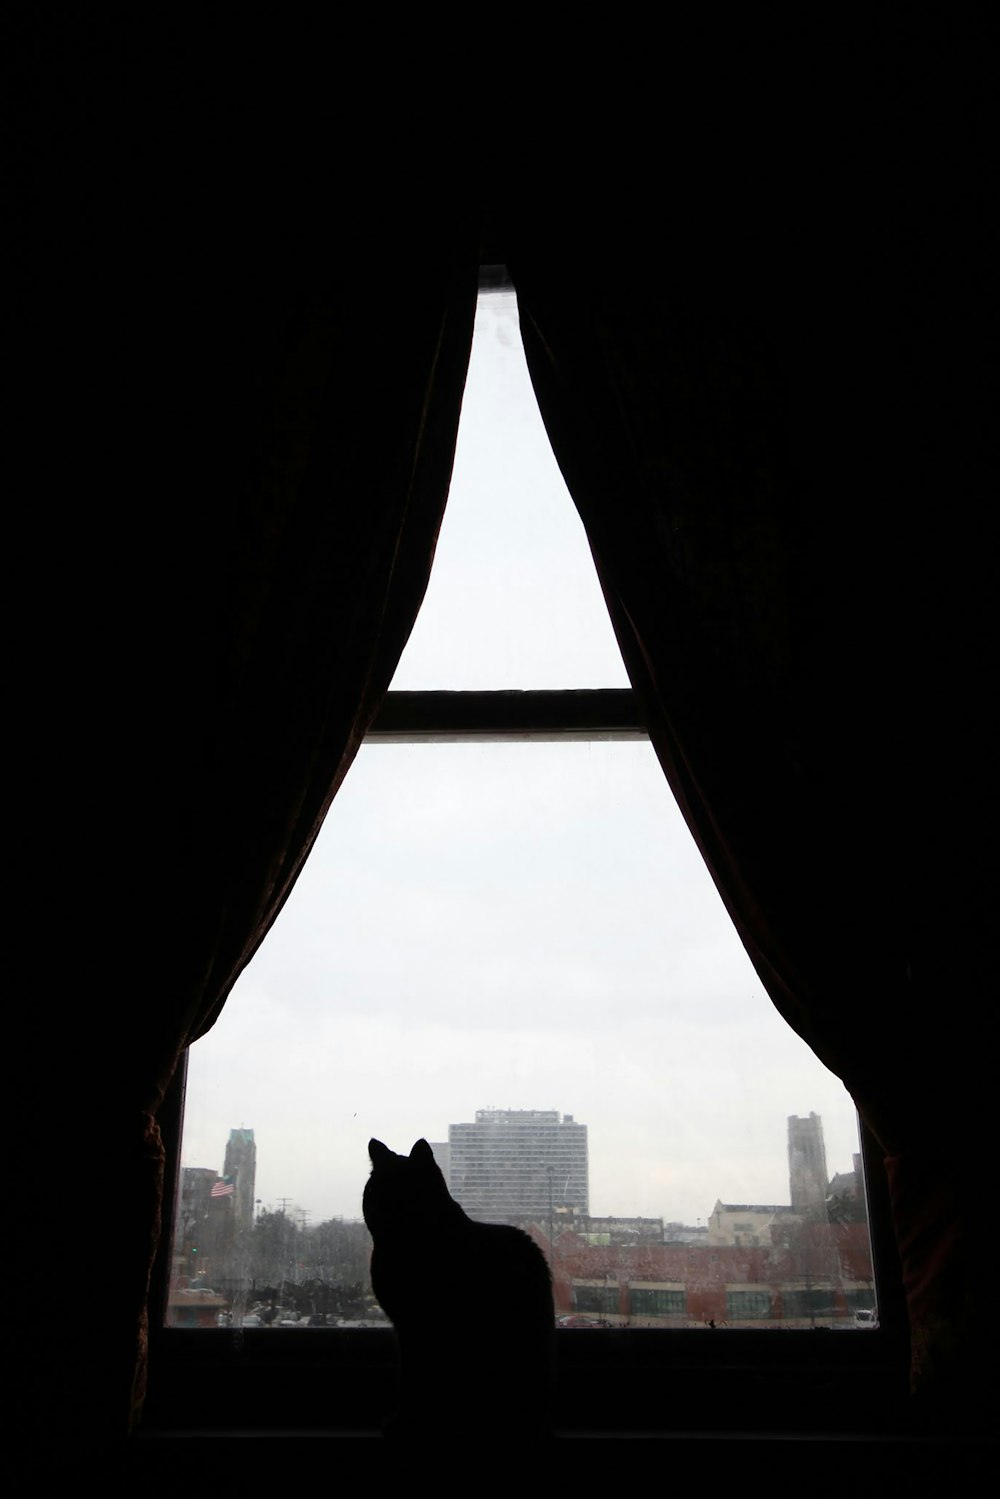 silhouette of cat in front of window during daytime